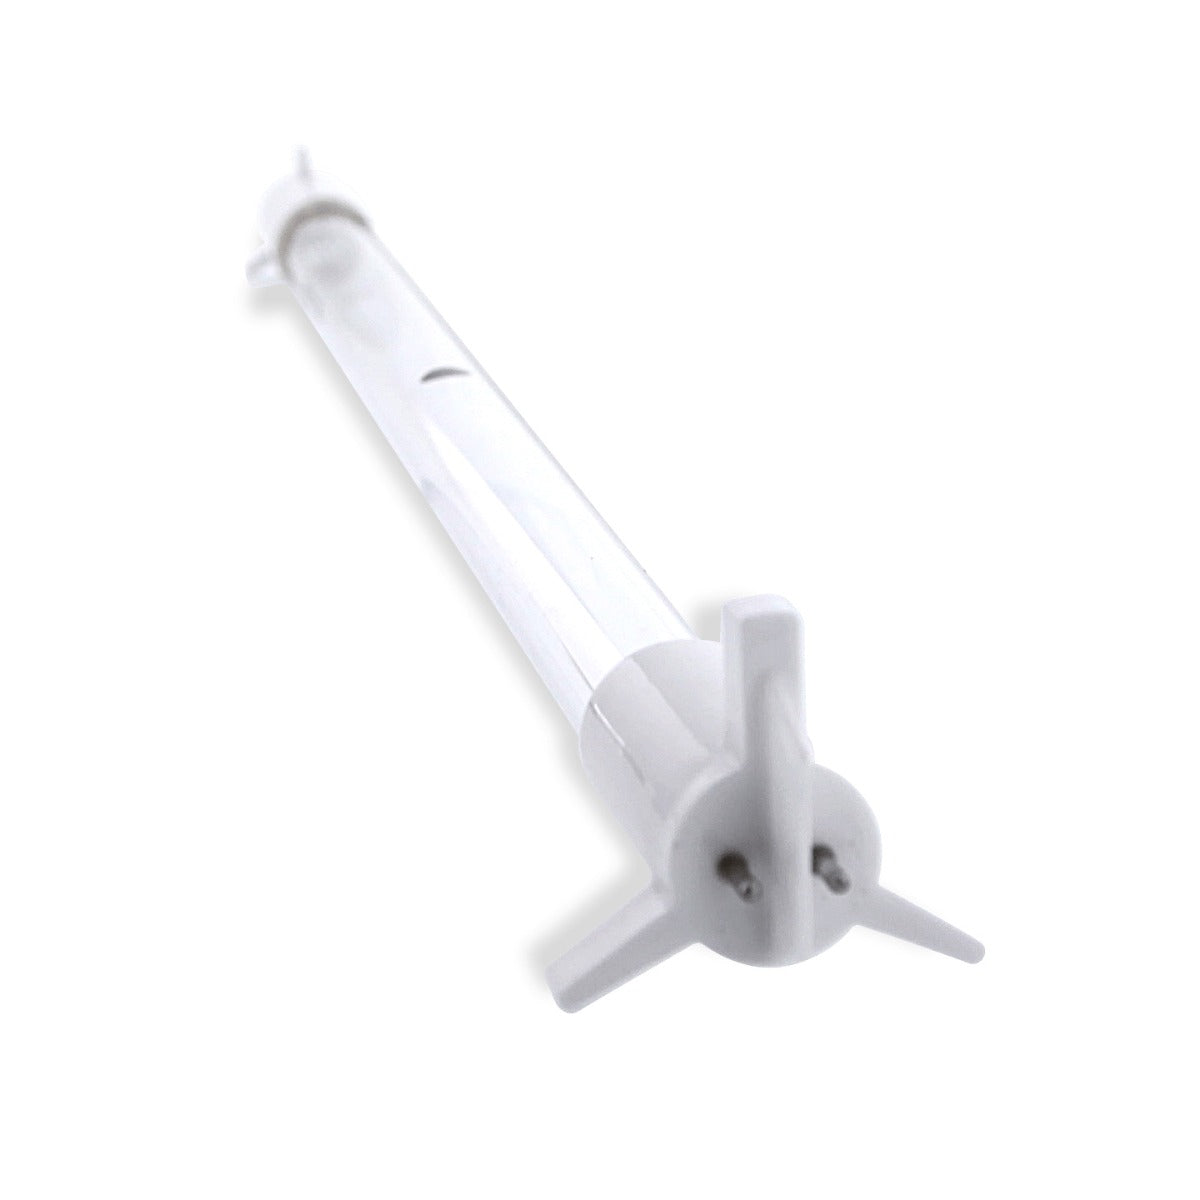 USWF Replacement for 602854 UV Lamp | Fits the VIQUA G/G+, & Pro 10 Series UV Systems